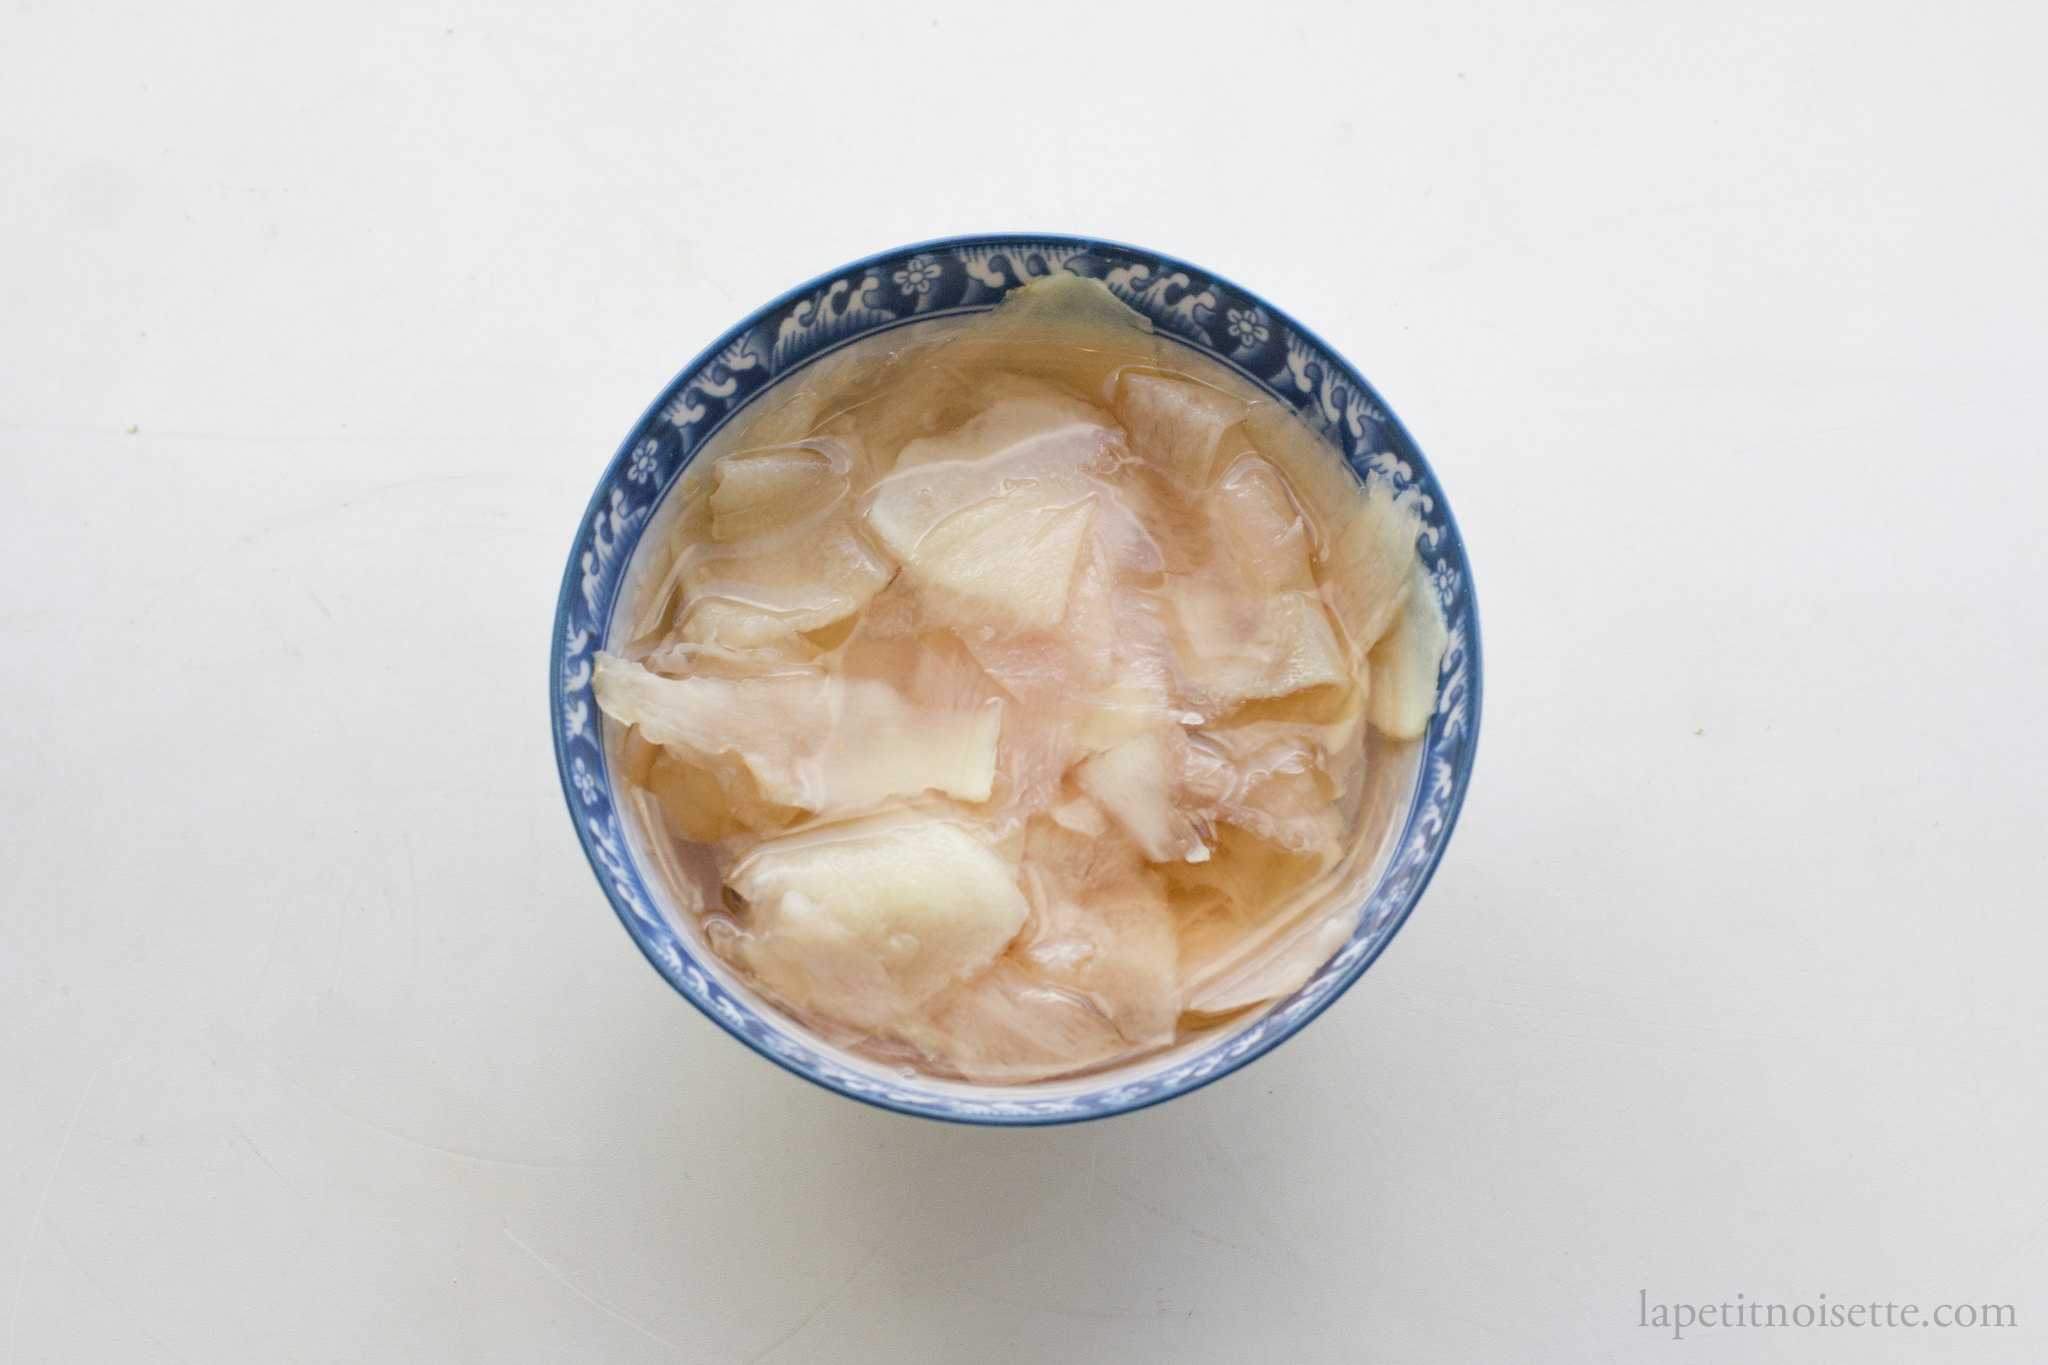 Pickled ginger with a pink tinge.